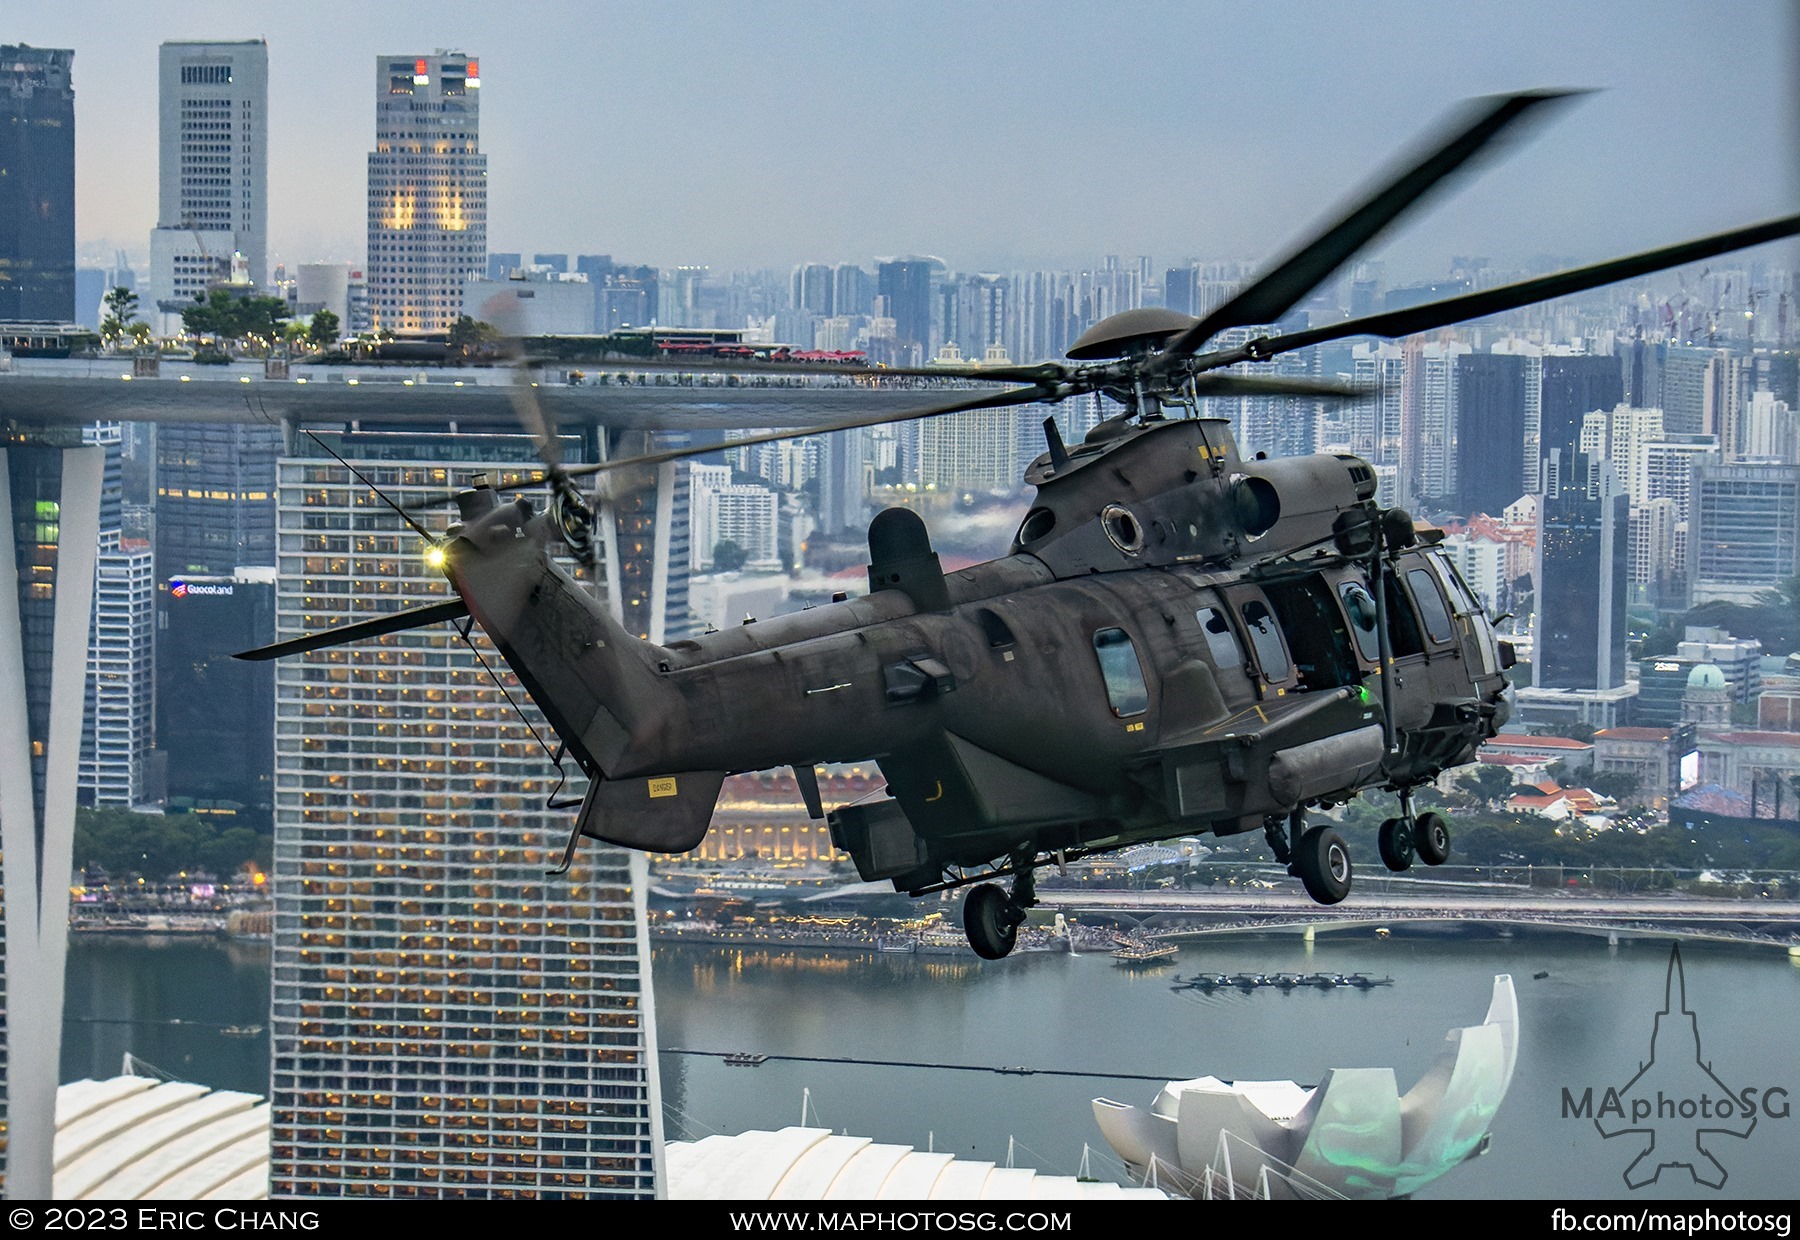 The H225M is one of RSAF newest assets, and is making its NDP debut this year under the Helicopter Group flypast.